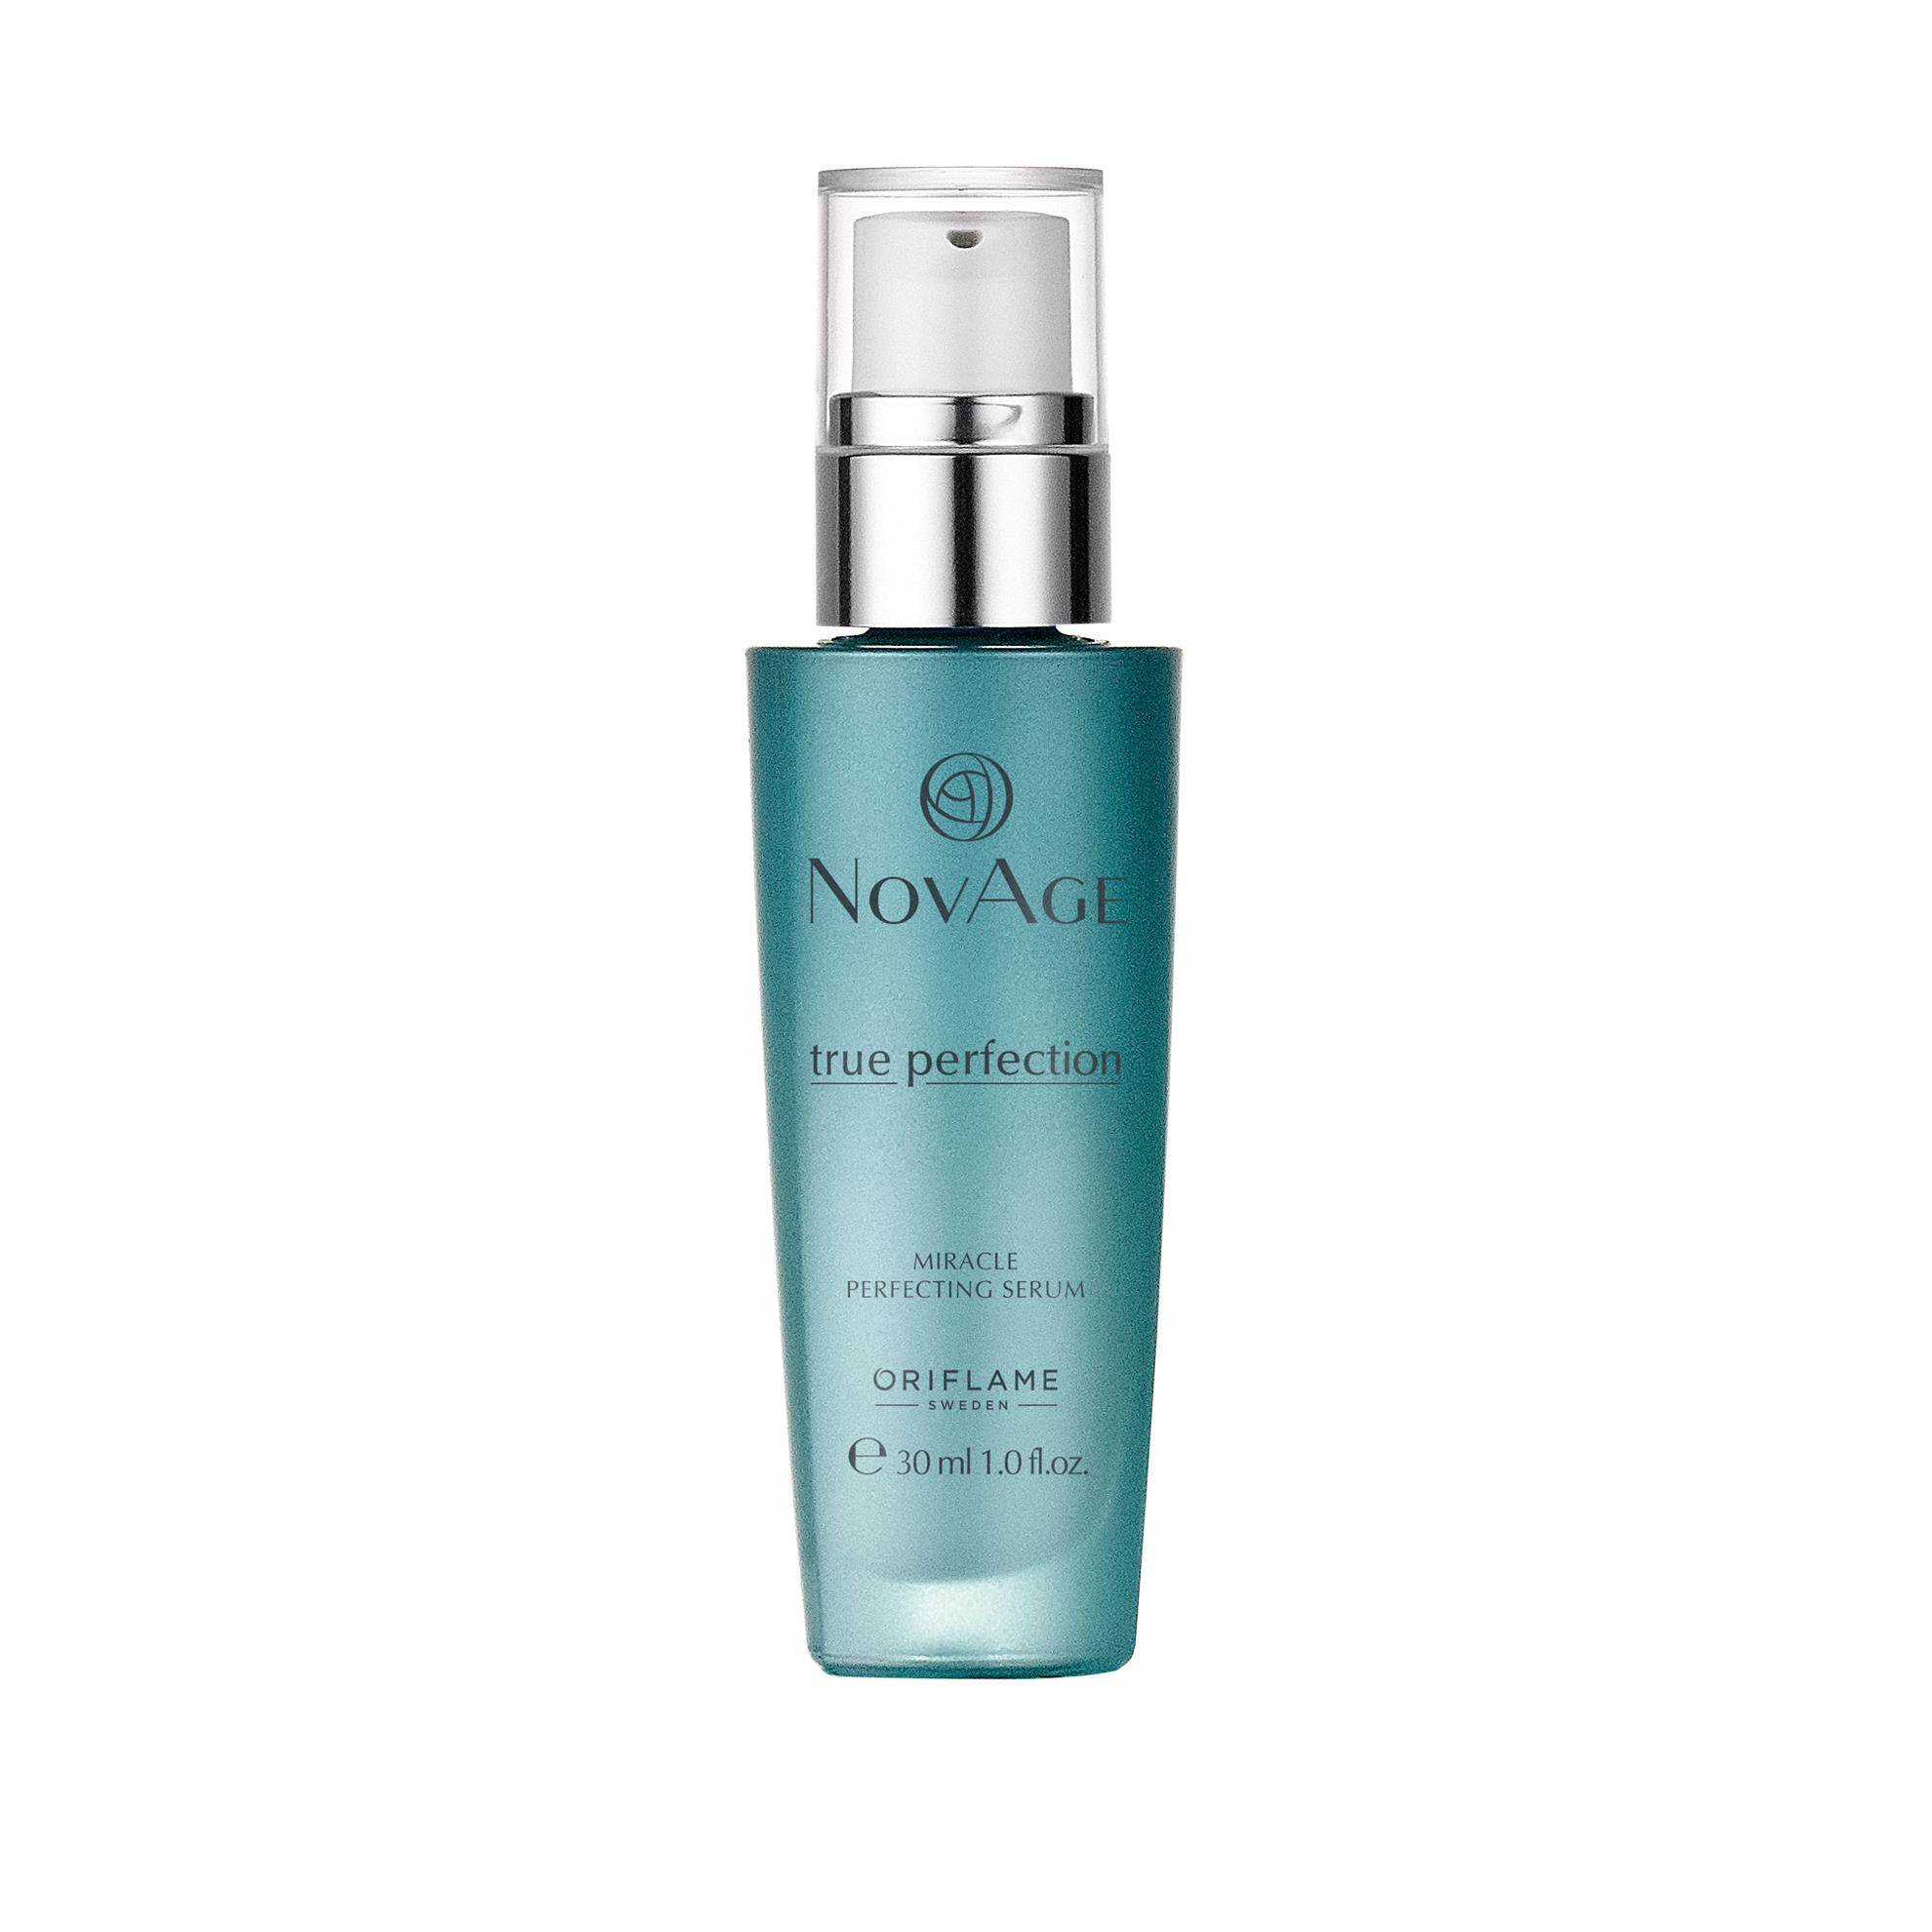 novage-true-perfection-miracle-perfecting-serum